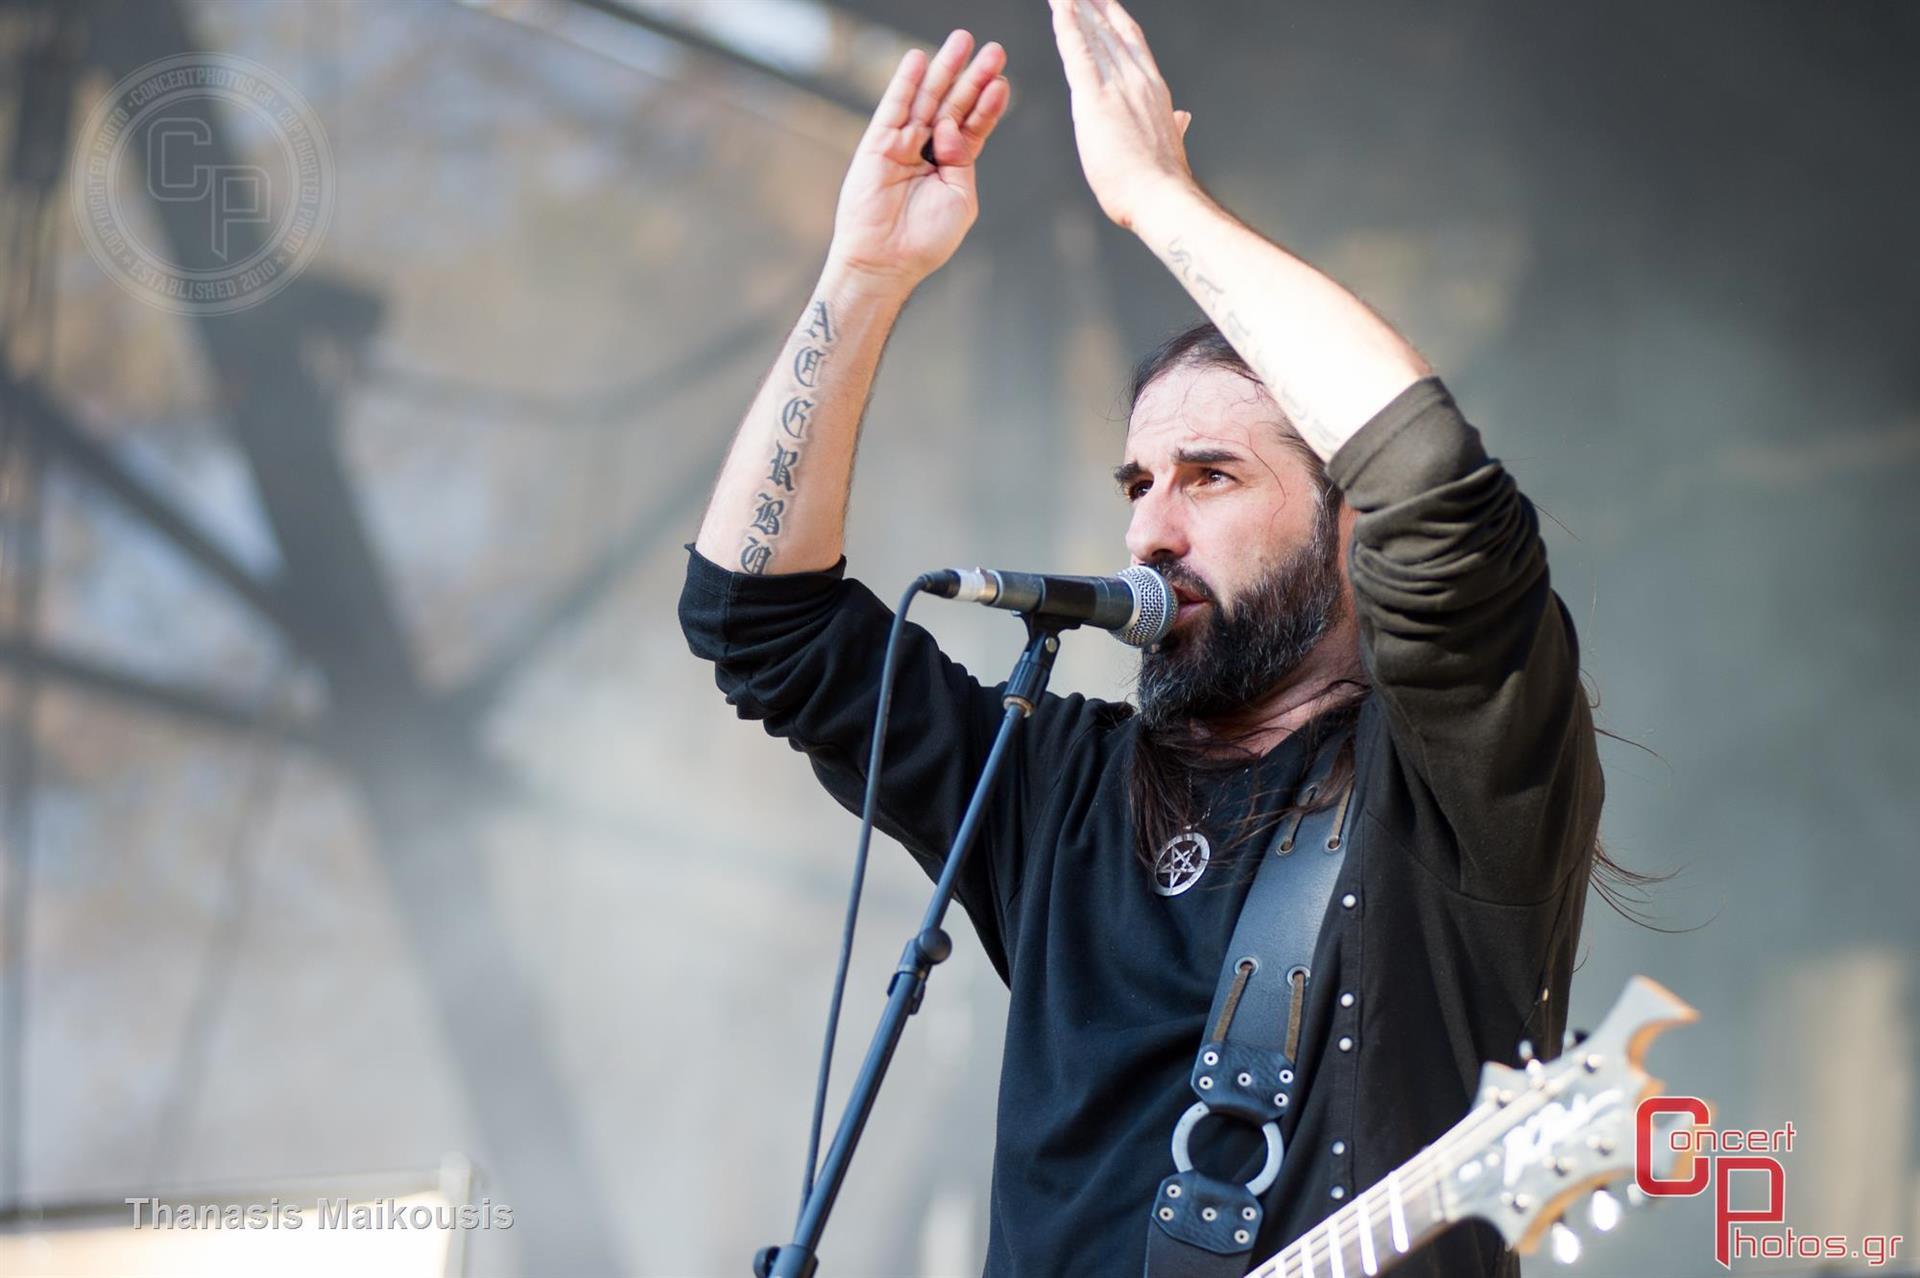 Rockwave 2015 - Day 3-Rockwave 2015 - Day 3 photographer: Thanasis Maikousis - ConcertPhotos - 20150704_1814_28